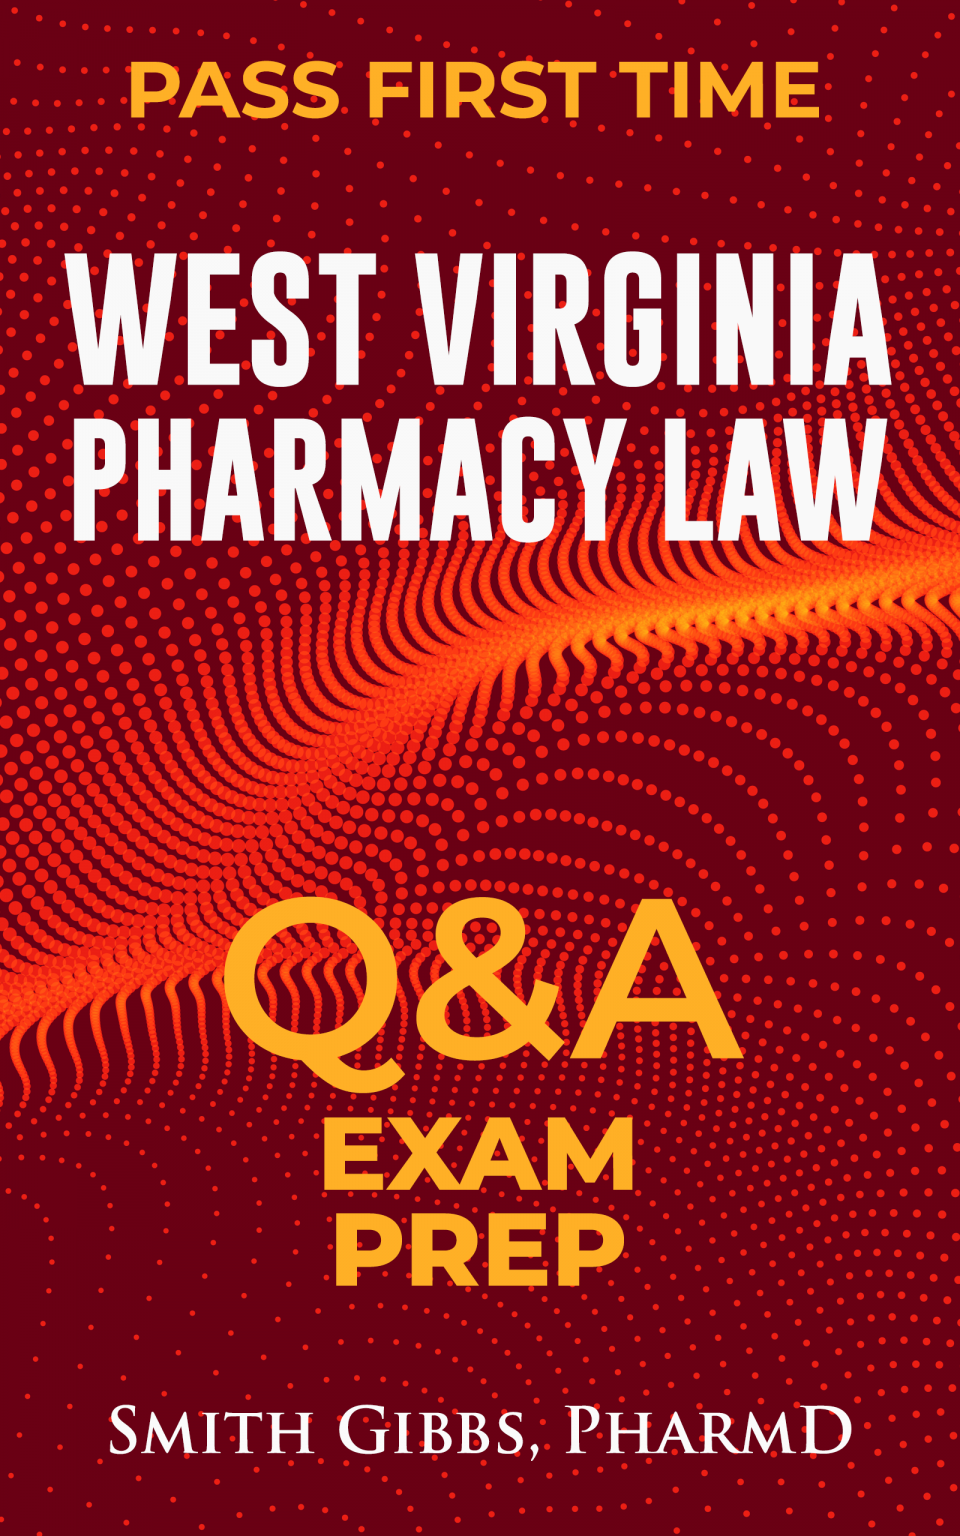 West Virginia MPJE Exam Prep Q & A is now available at Rx Pharmacy Exam